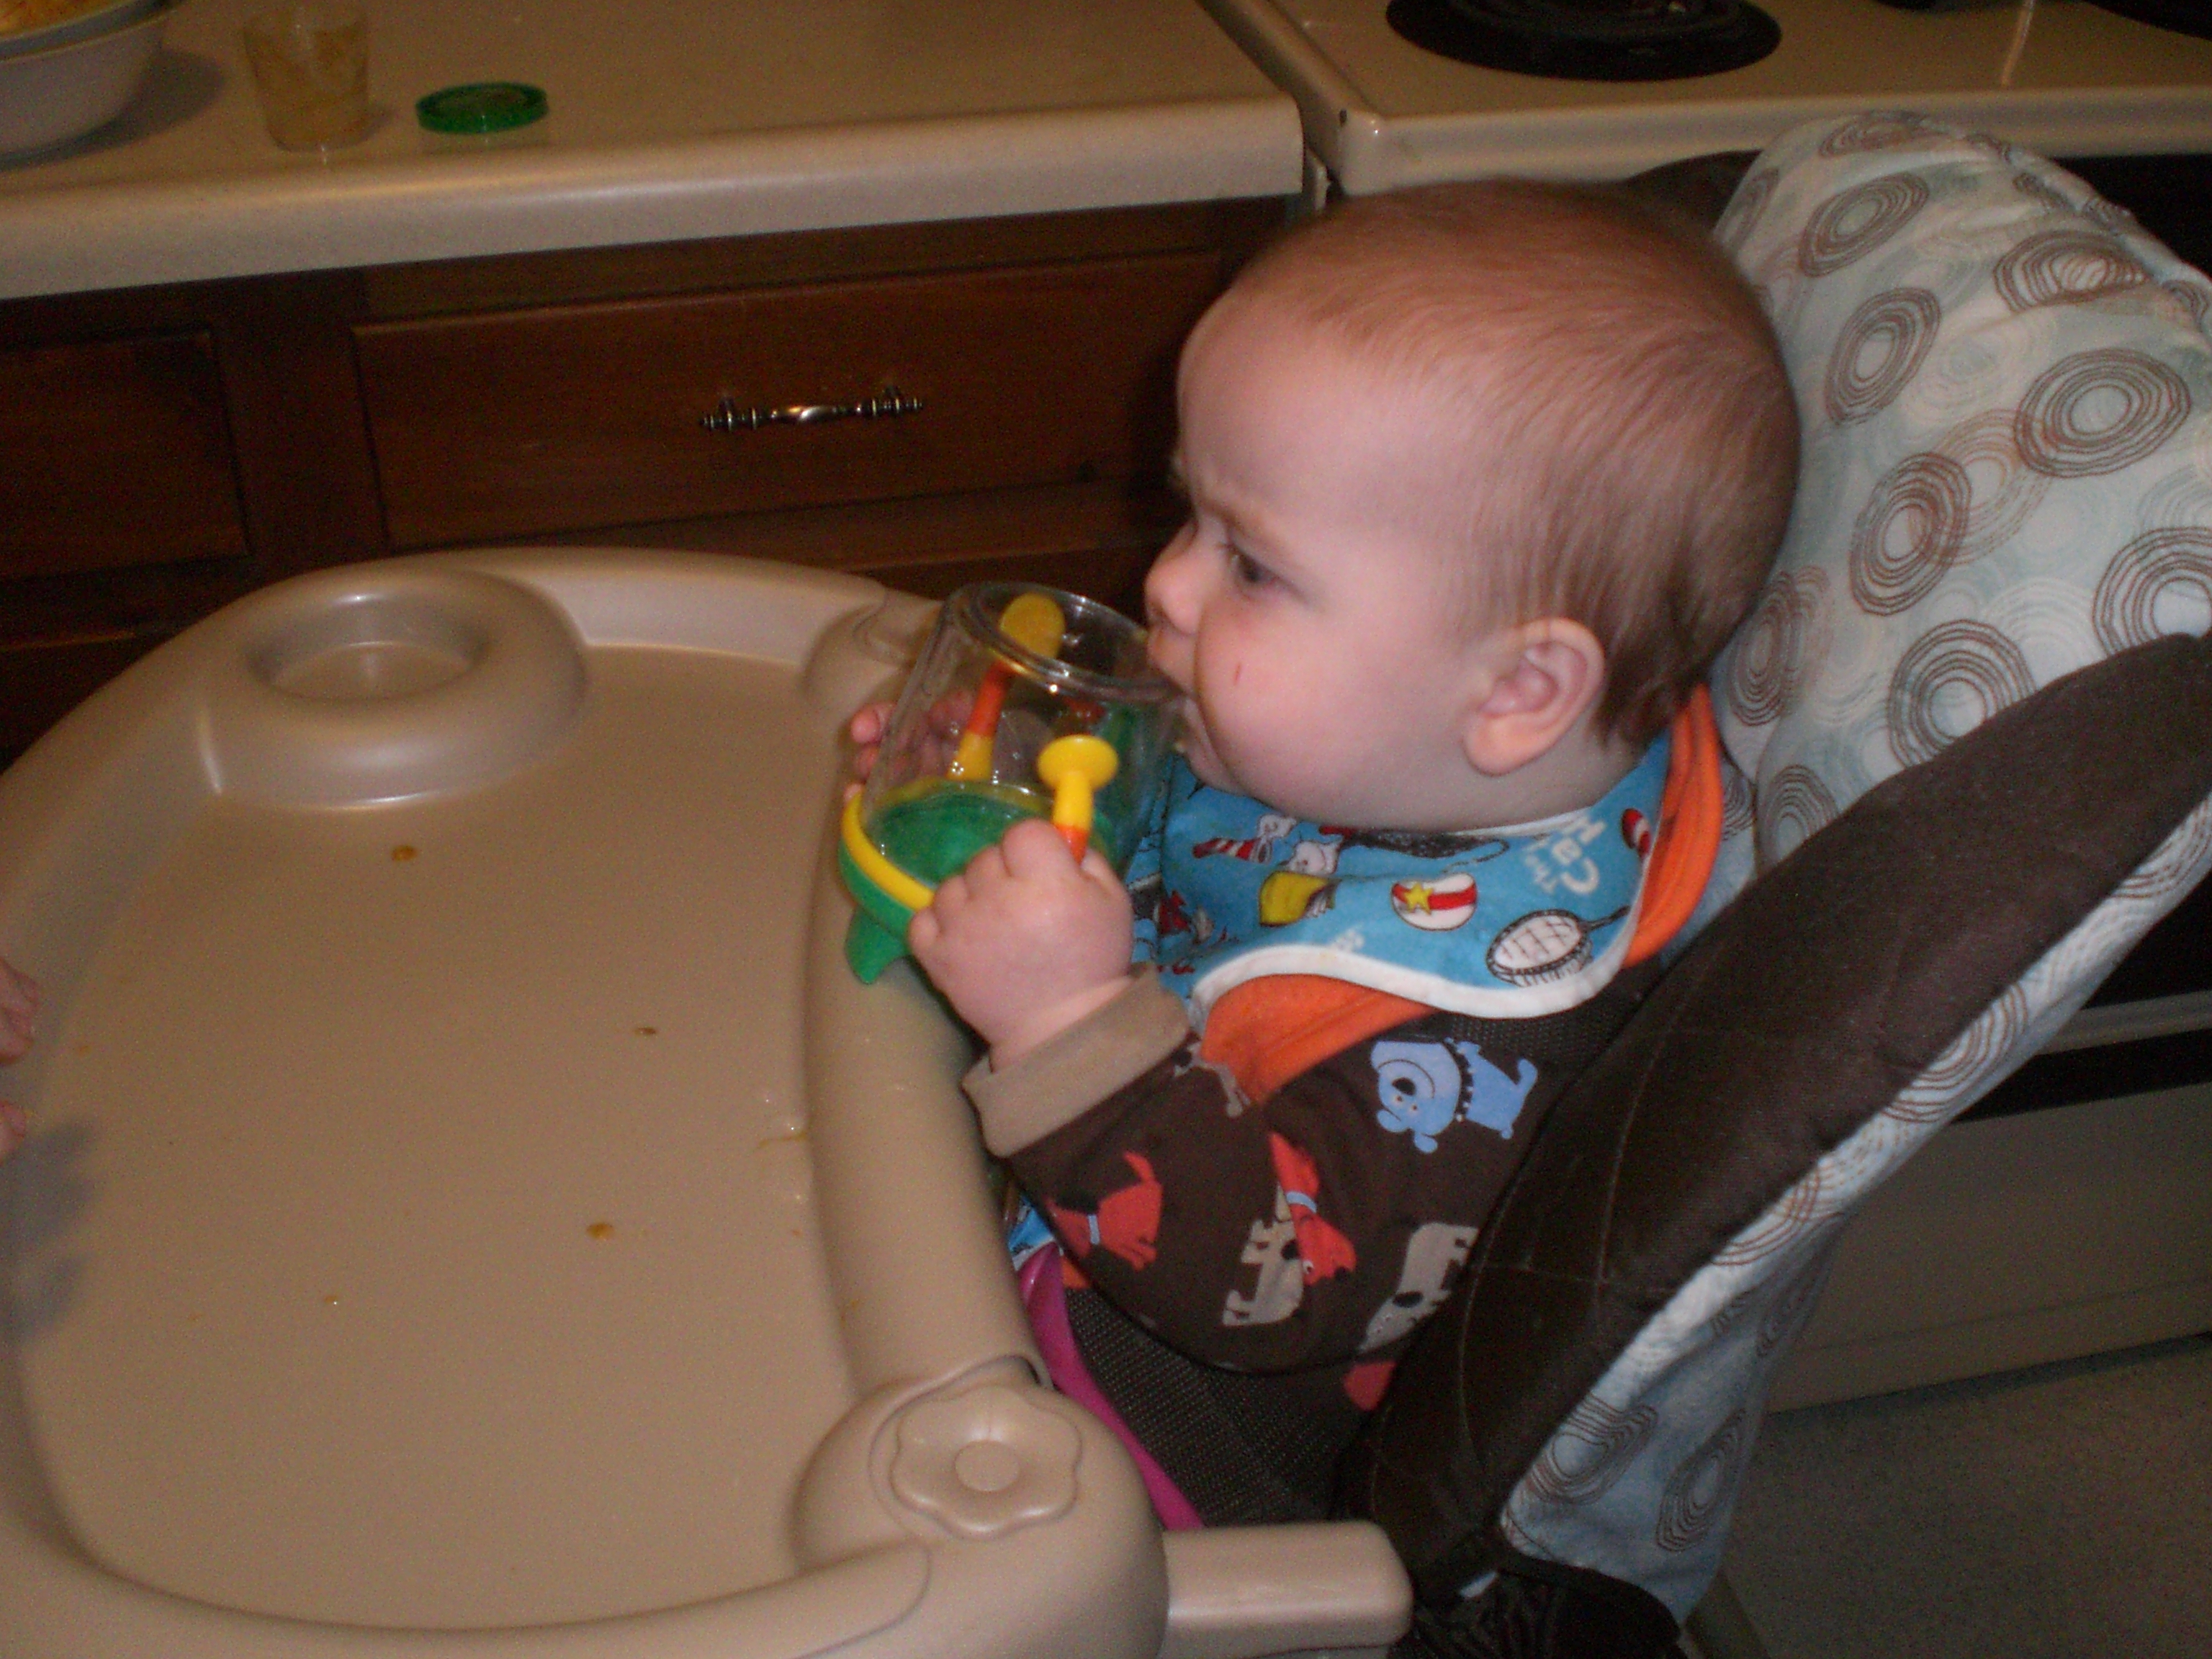 But hasn’t quite yet mastered the art of the sippy cup